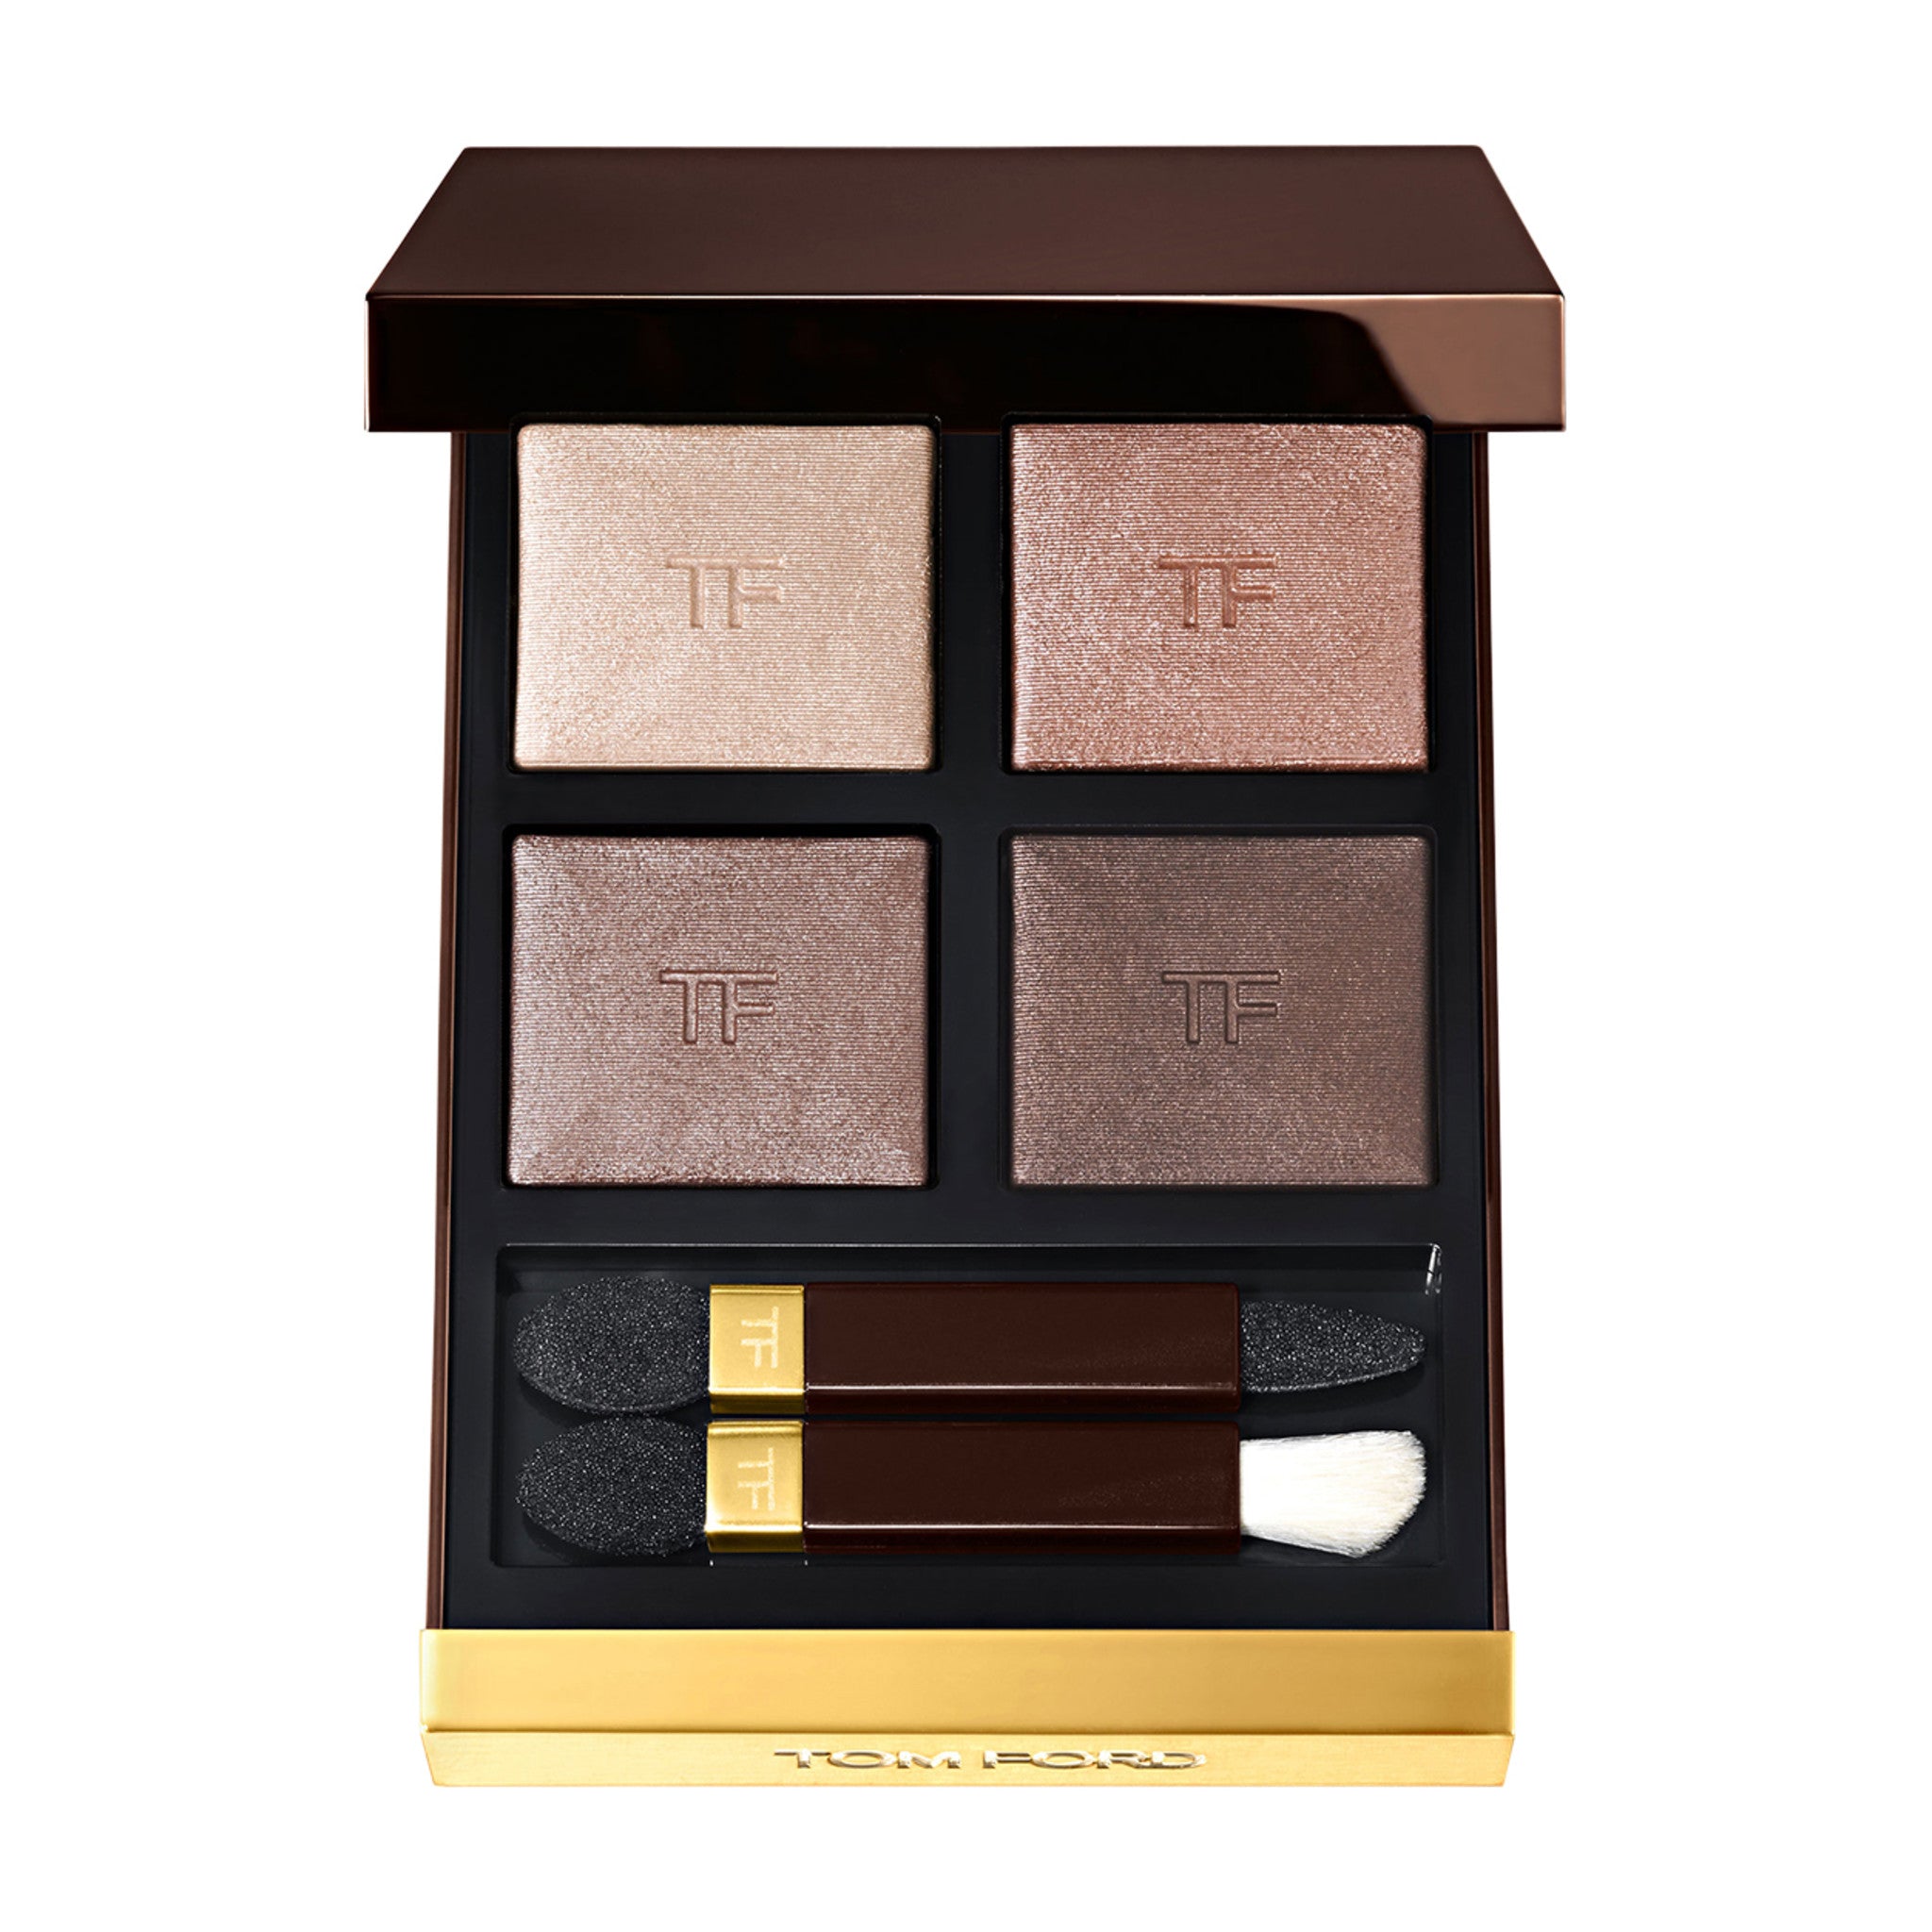 Tom Ford Eye Color Quad Eyeshadow Color/Shade variant: Nude Dip main image. This product is in the color nude